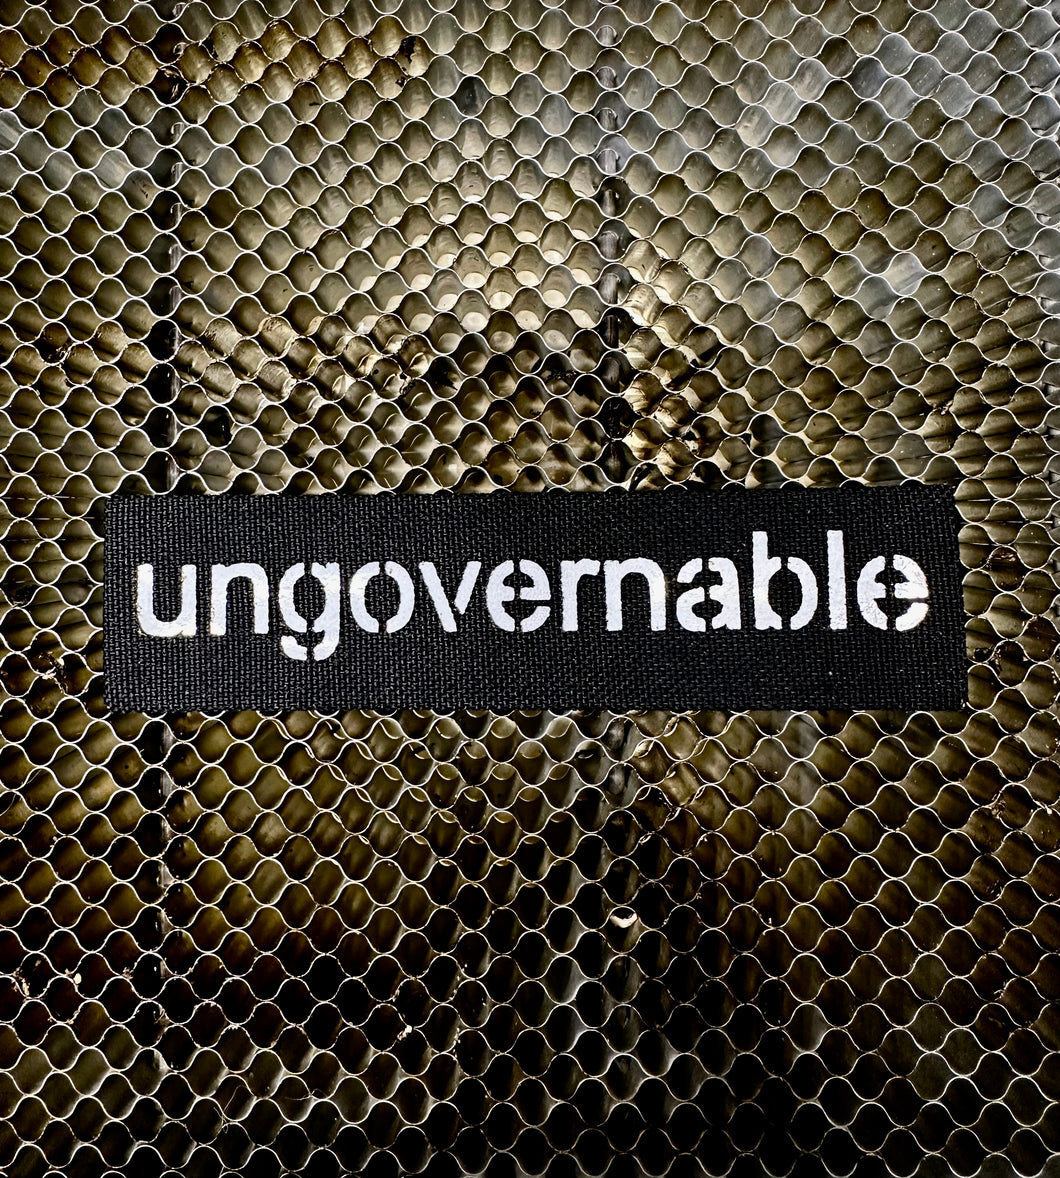 Ungovernable v1